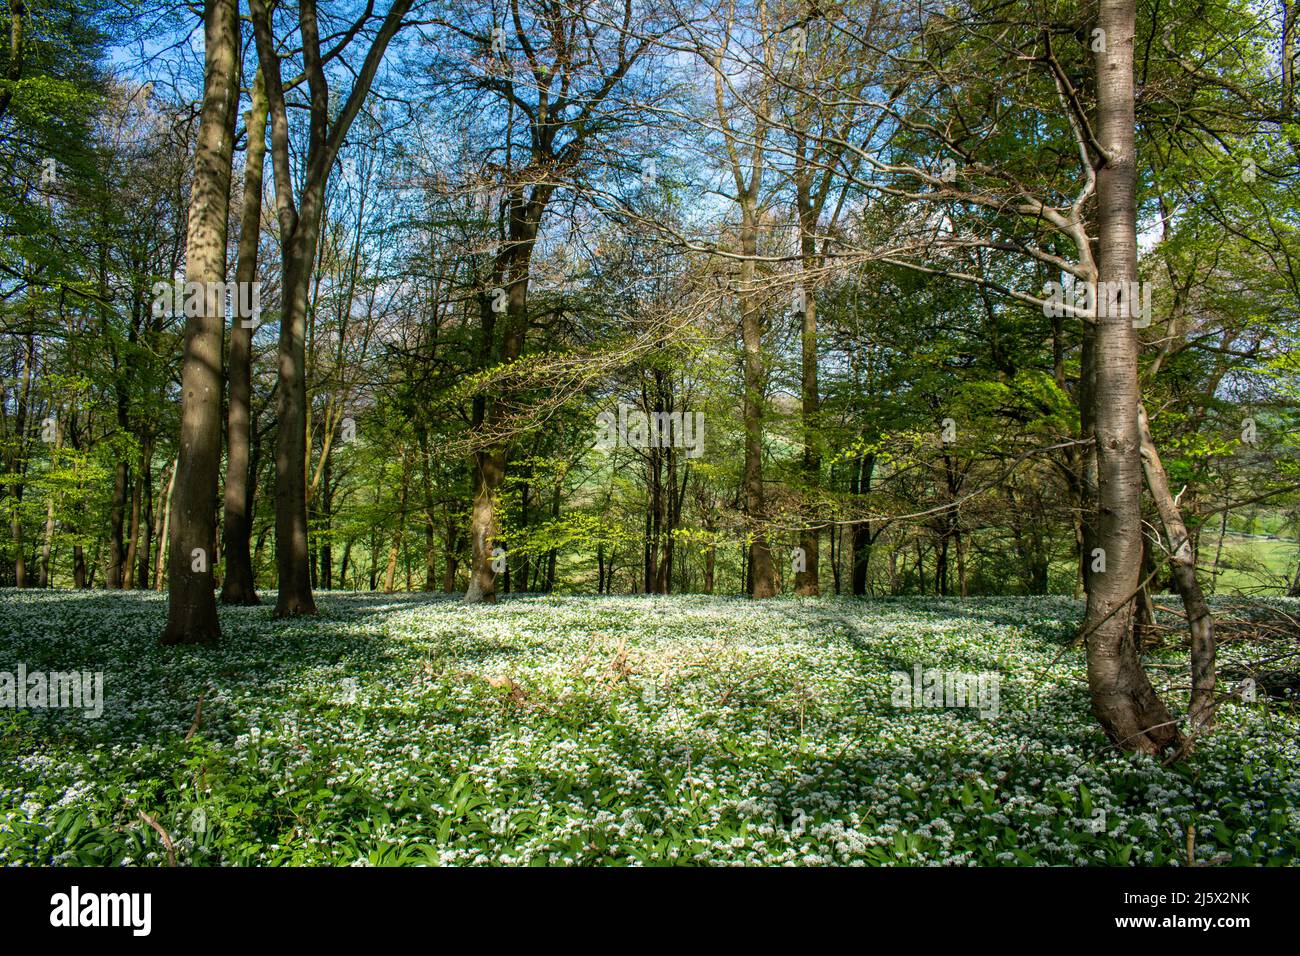 Wild garlic and bluebells growing amongst the trees of and English forest. Stock Photo